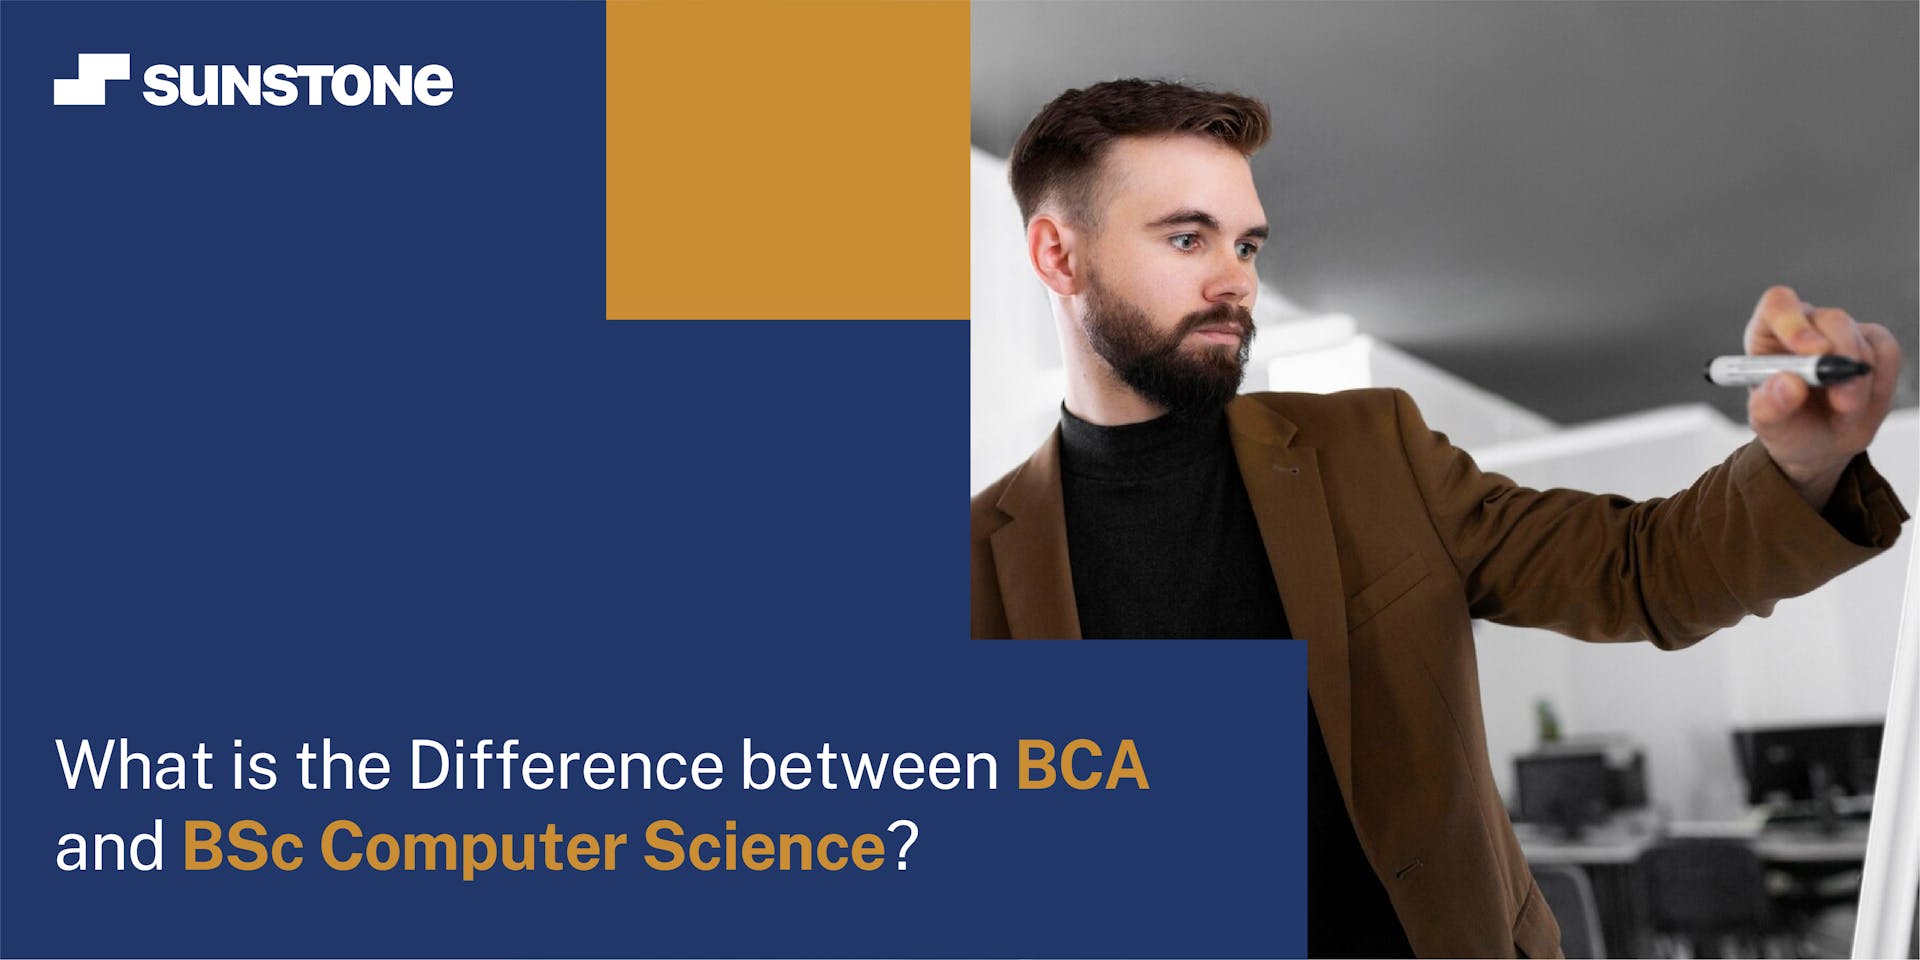 What is the Difference between BCA and BSc Computer Science?